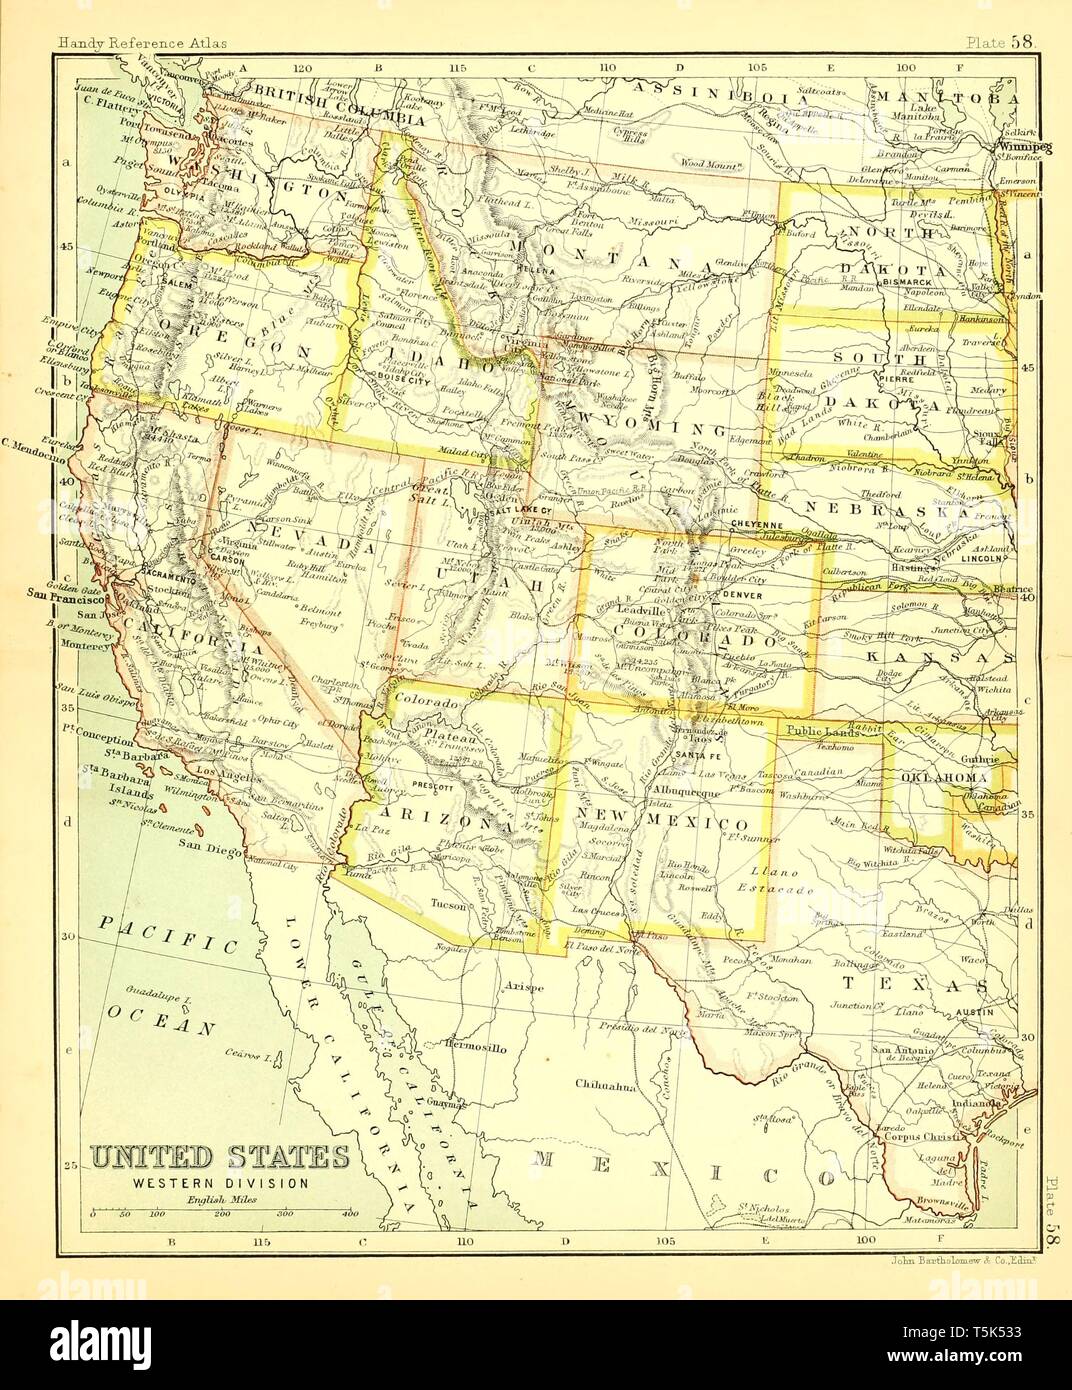 Beautiful vintage hand drawn map illustrations of USA West from old book. Can be used as poster or decorative element for interior design. Stock Photo